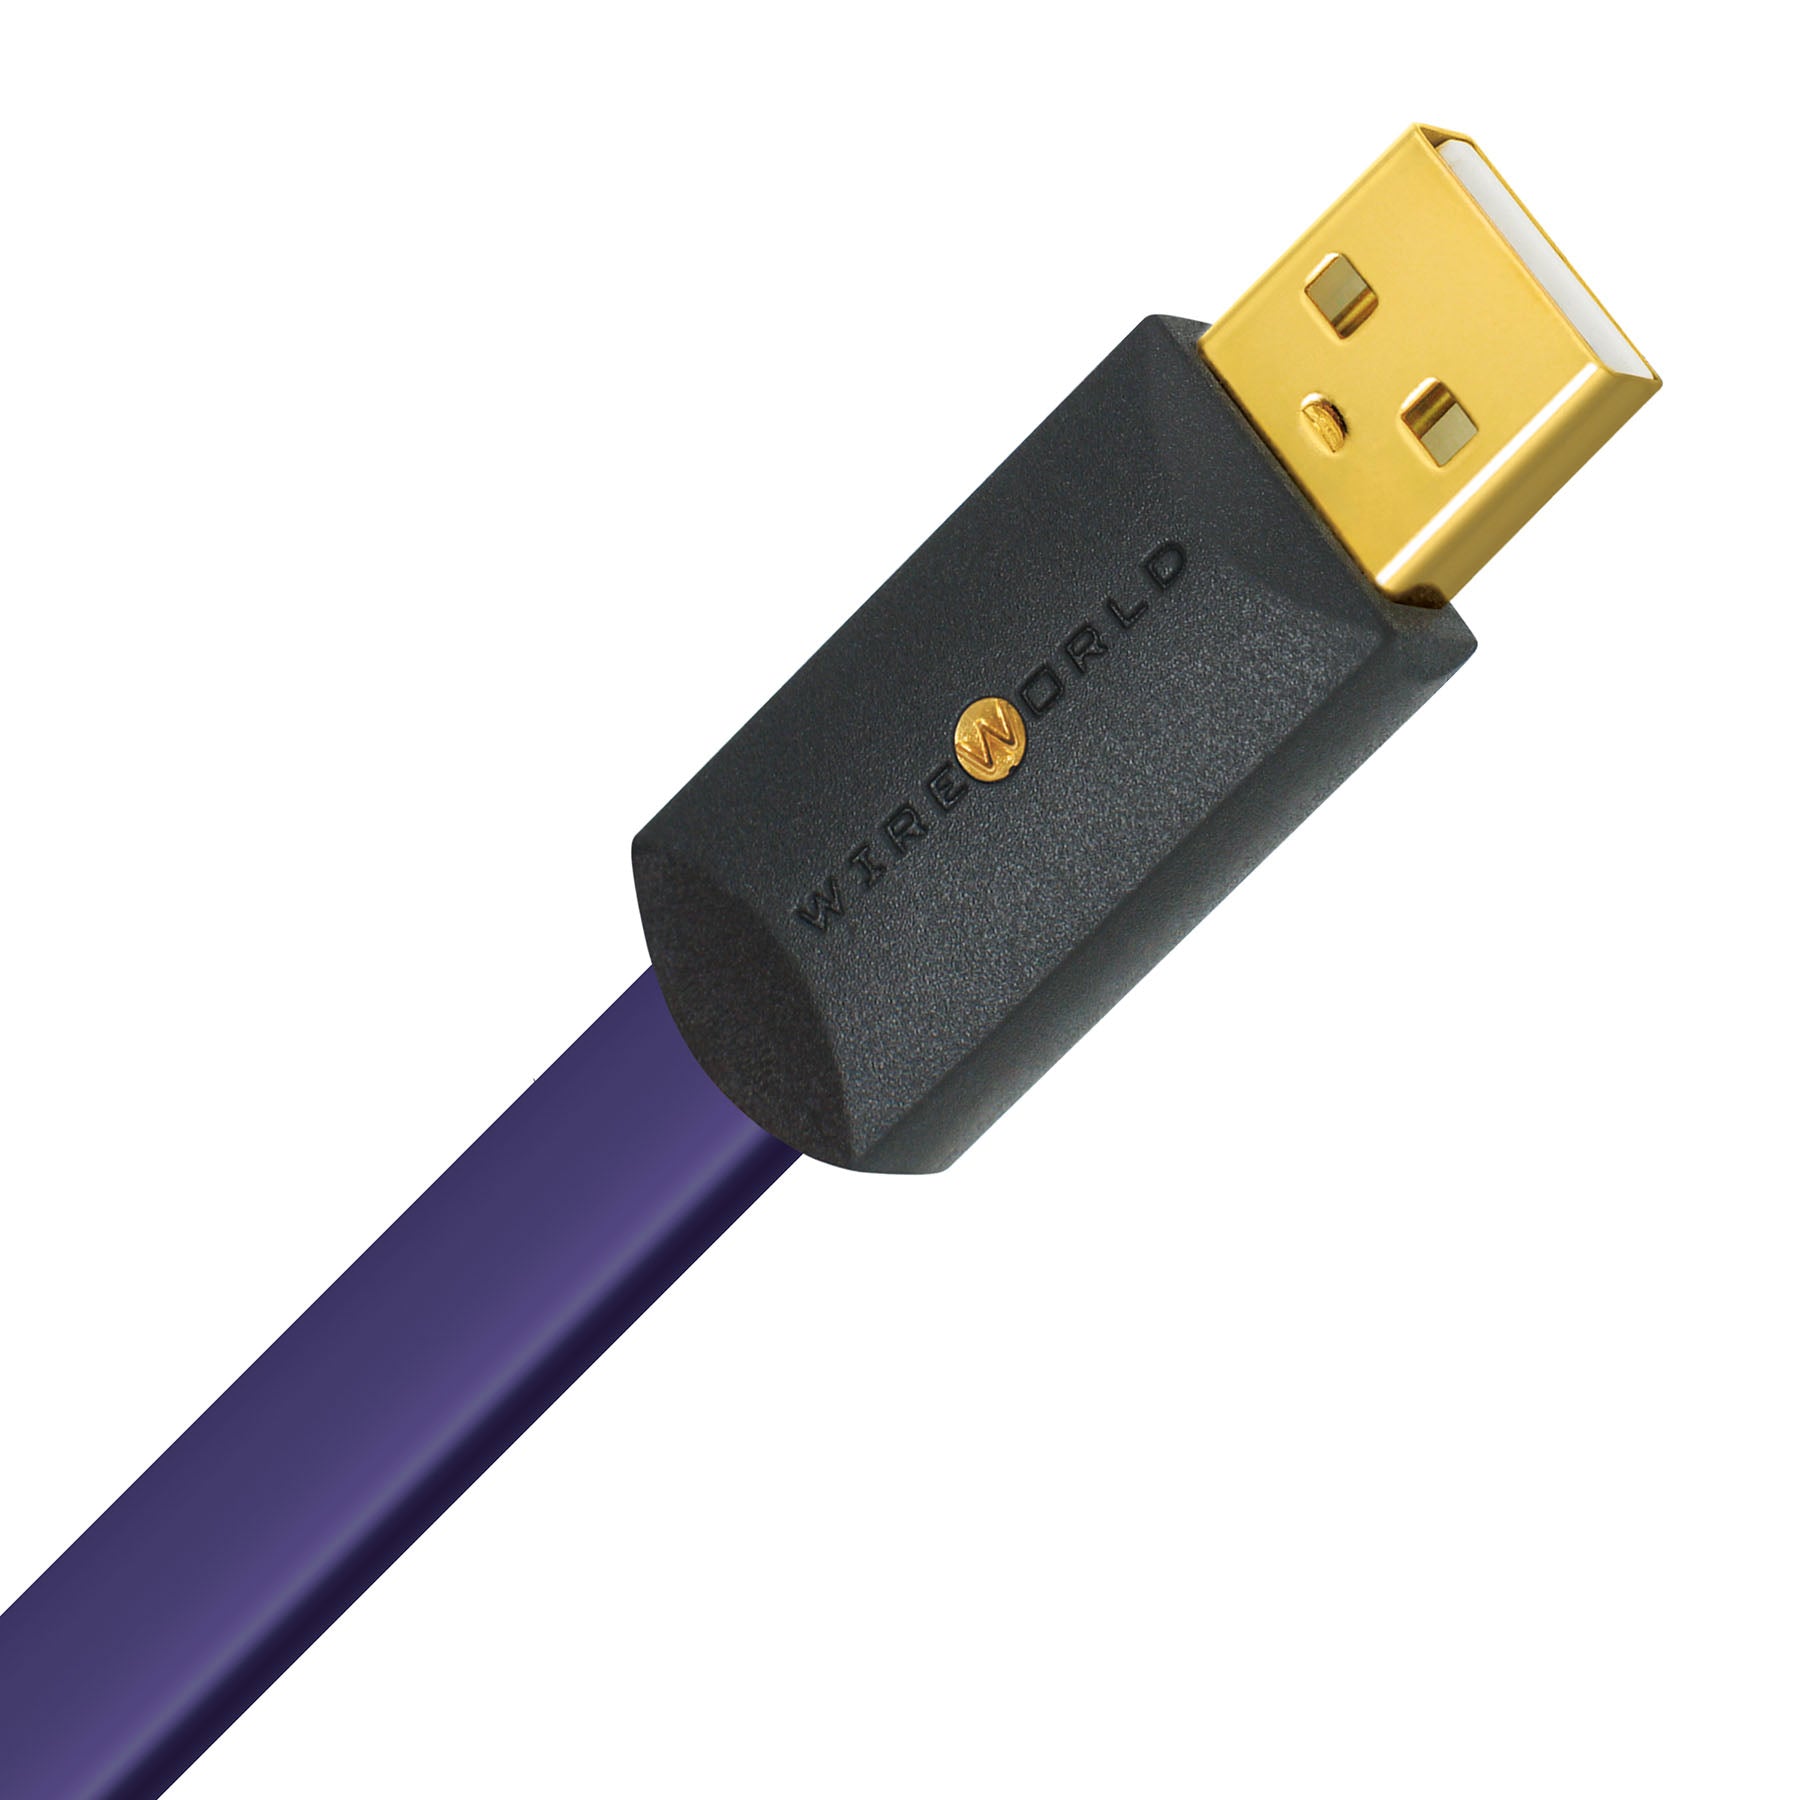 Wireworld Ultraviolet™ 8 USB 2.0 Audio Cables